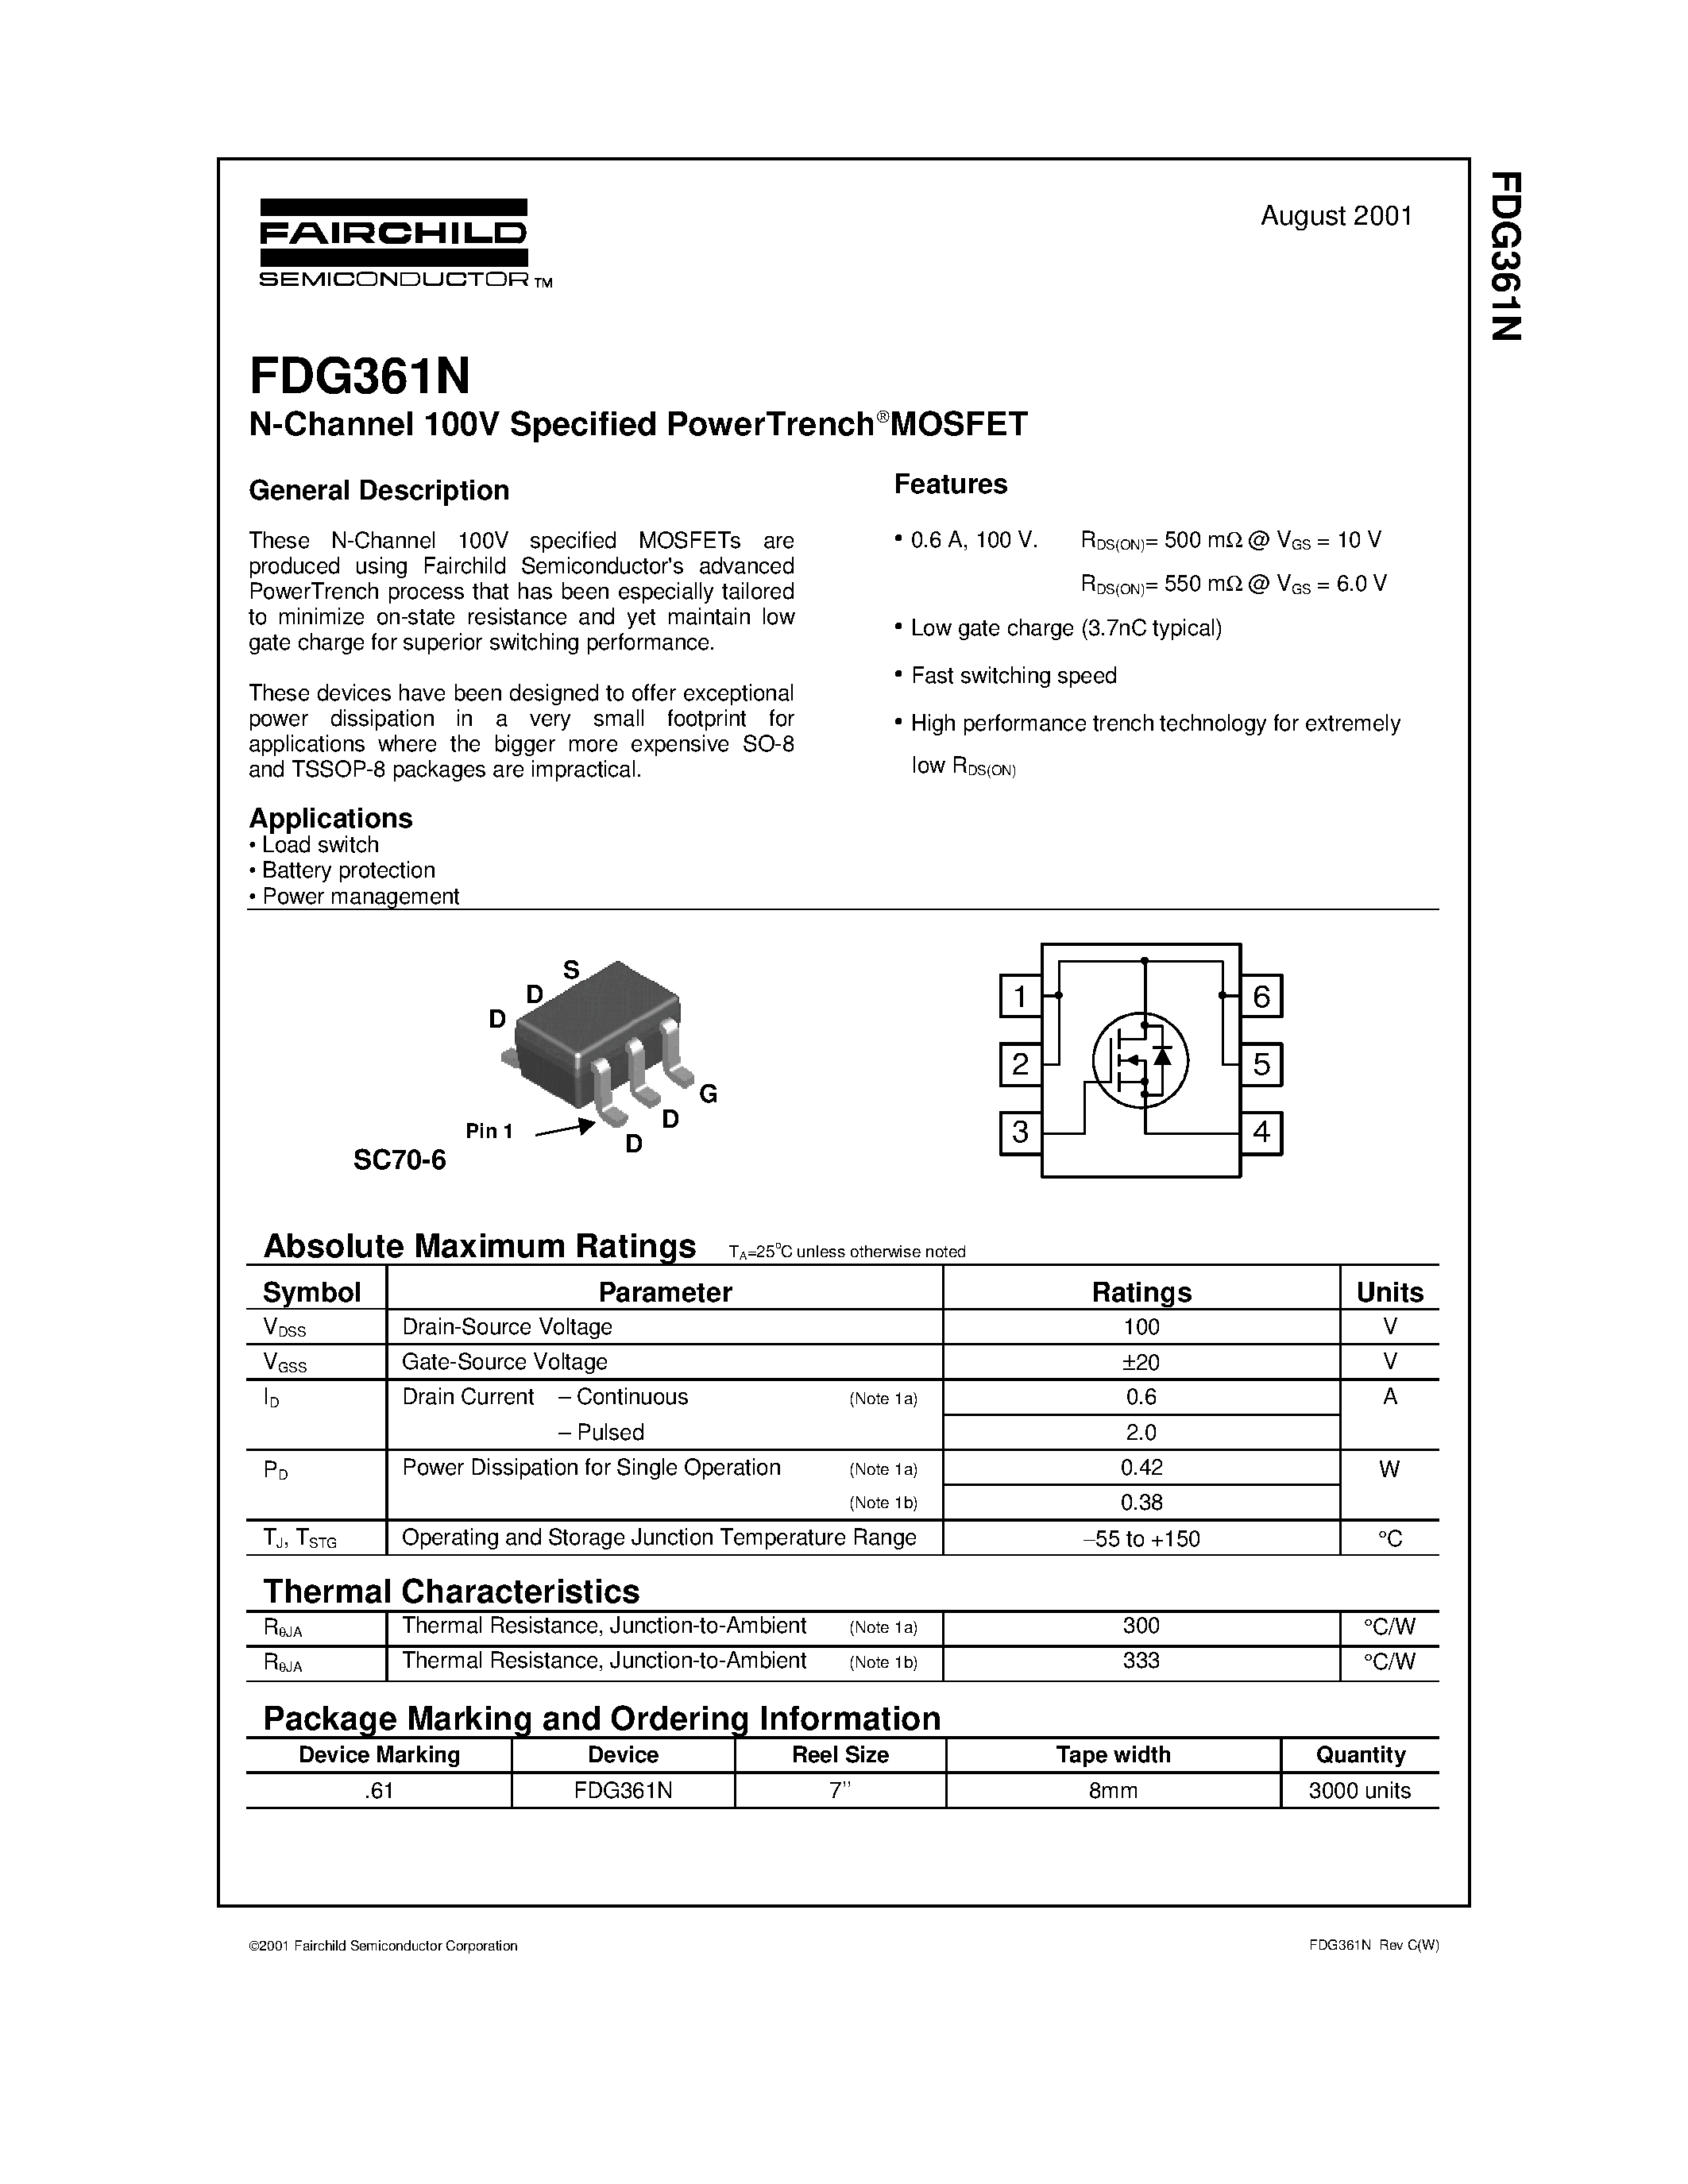 Даташит FDG361N - N-Channel 100V Specified PowerTrenchMOSFET страница 1